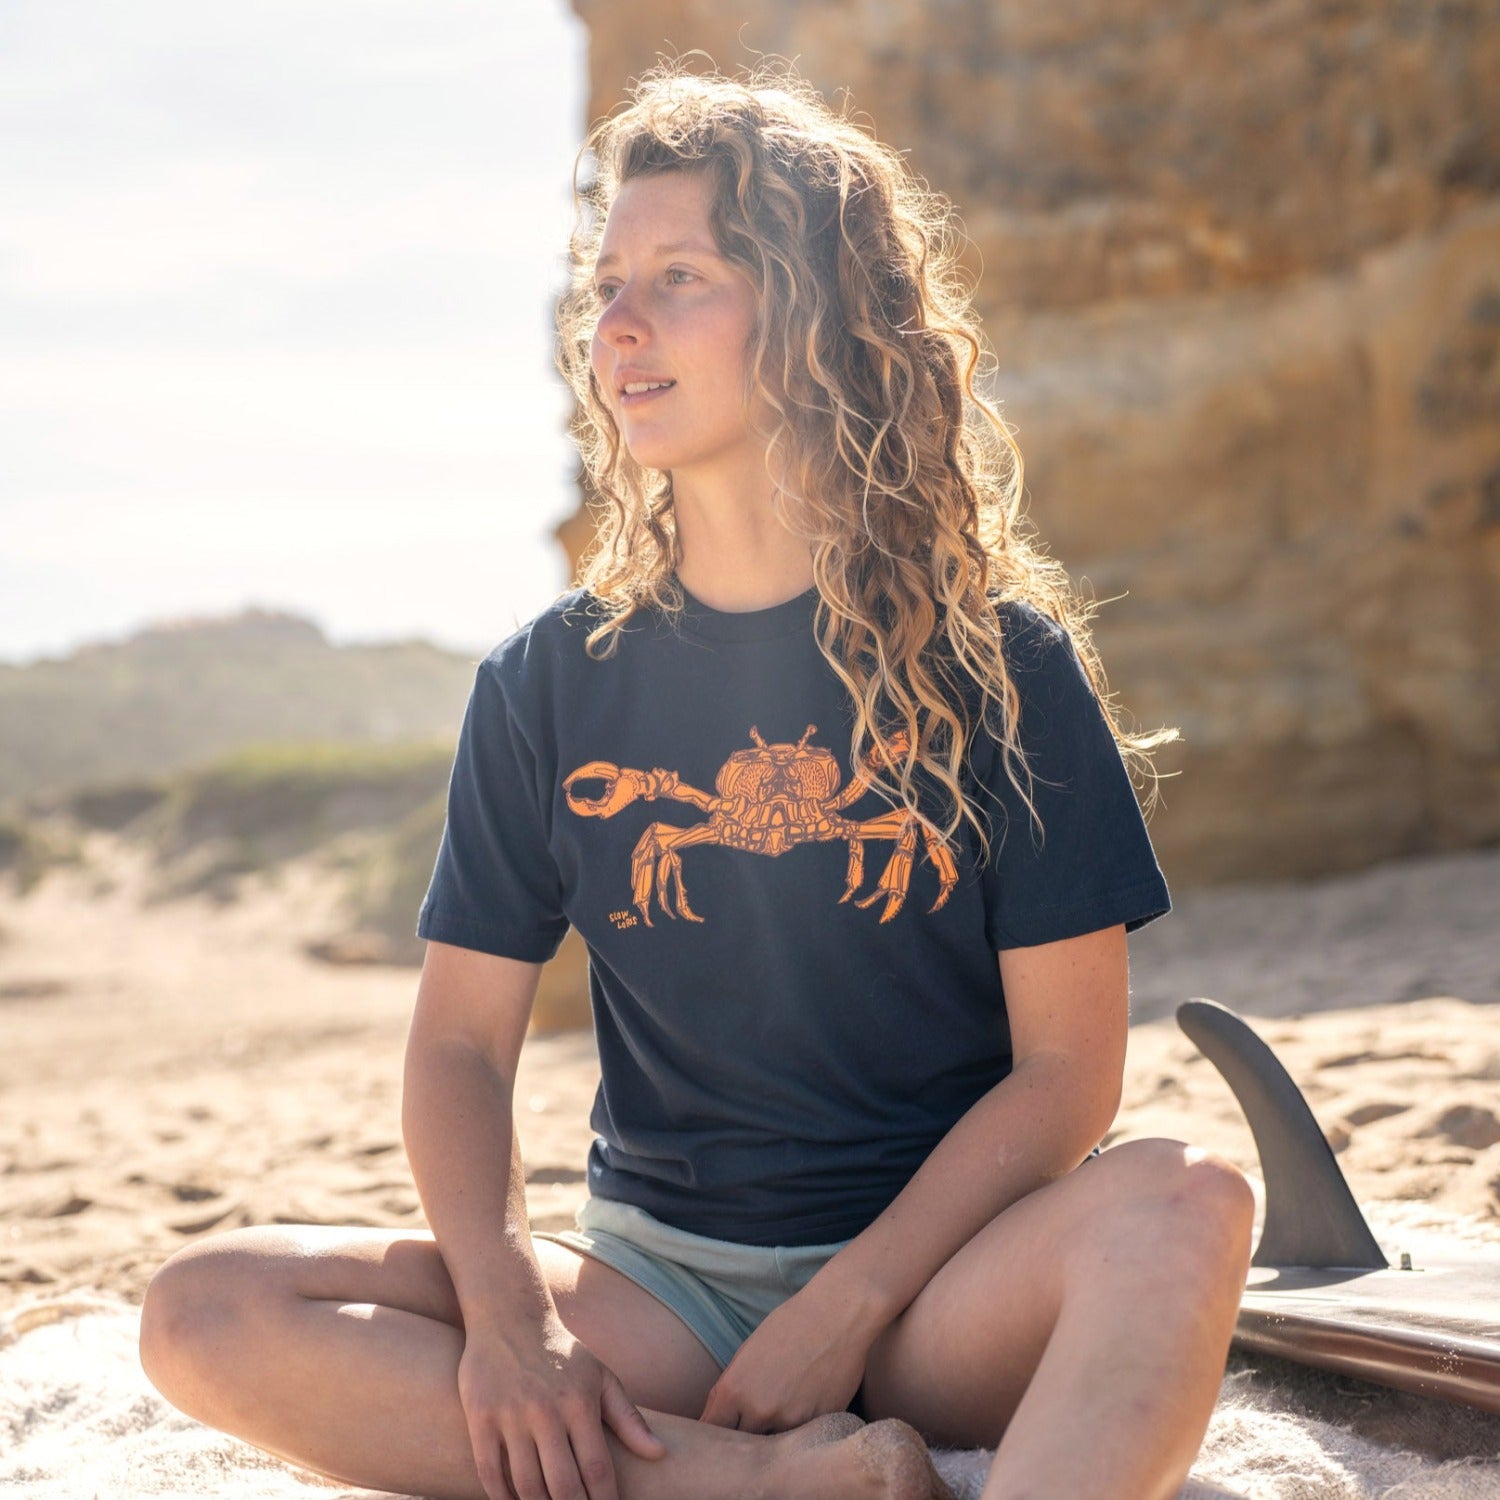 Girl on beach wearing blue t-shirt with a crab on it.